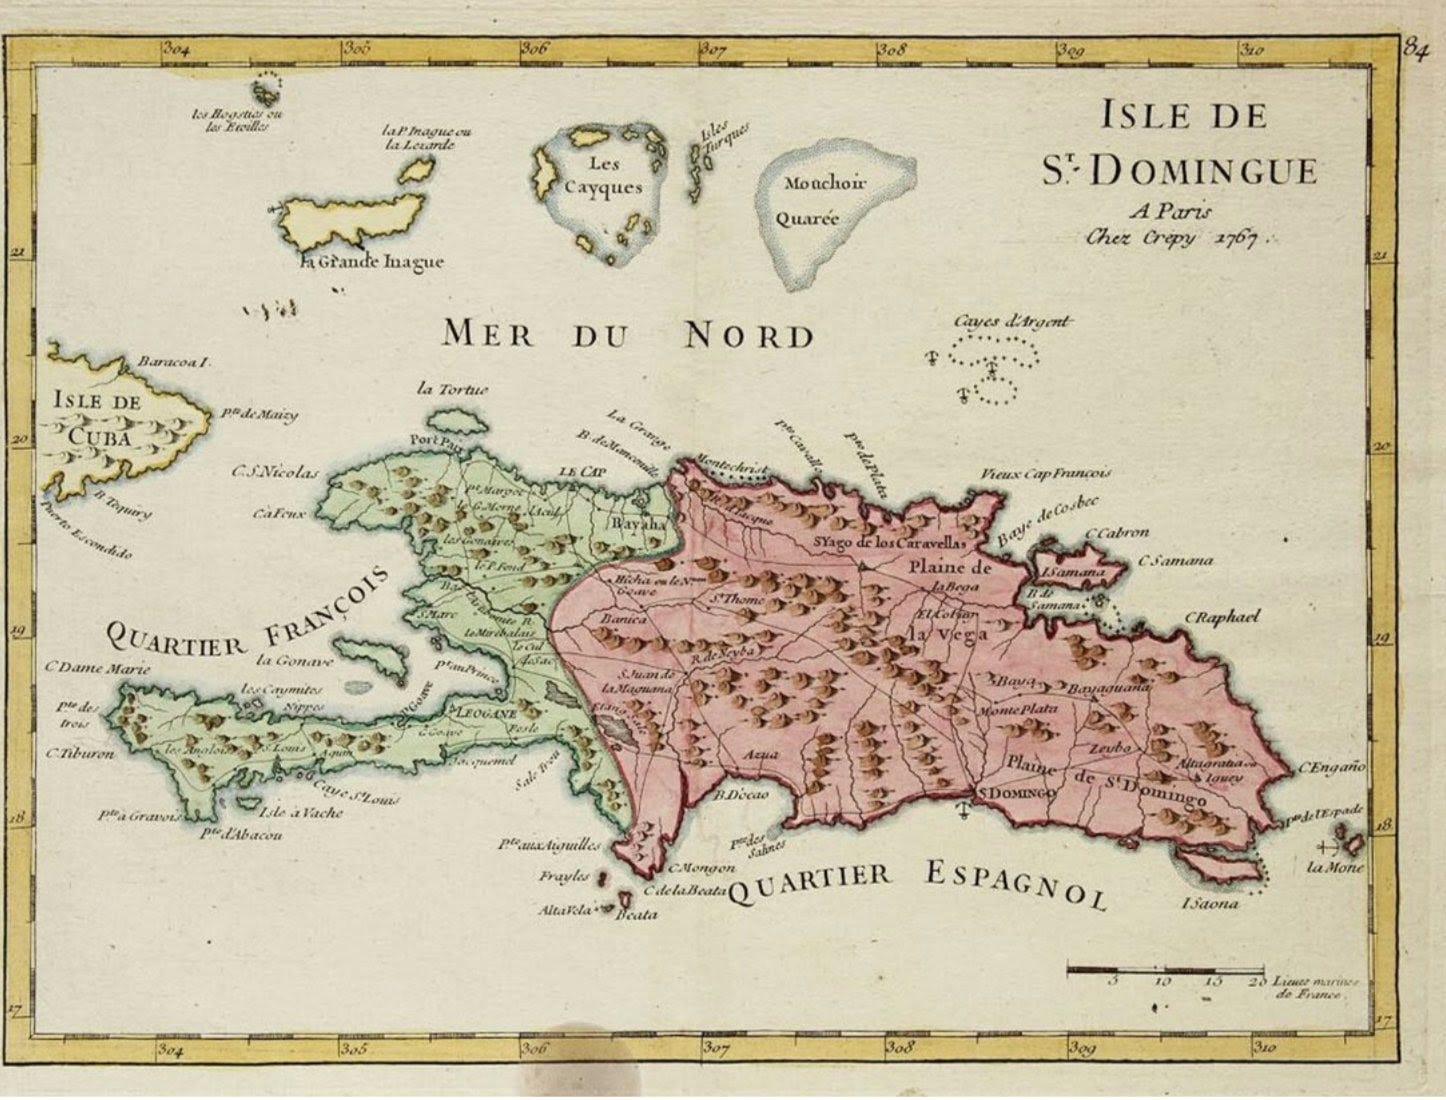 A French colonial map of the Island of Saint-Domingue, where today are Haiti and the Dominican Republic.